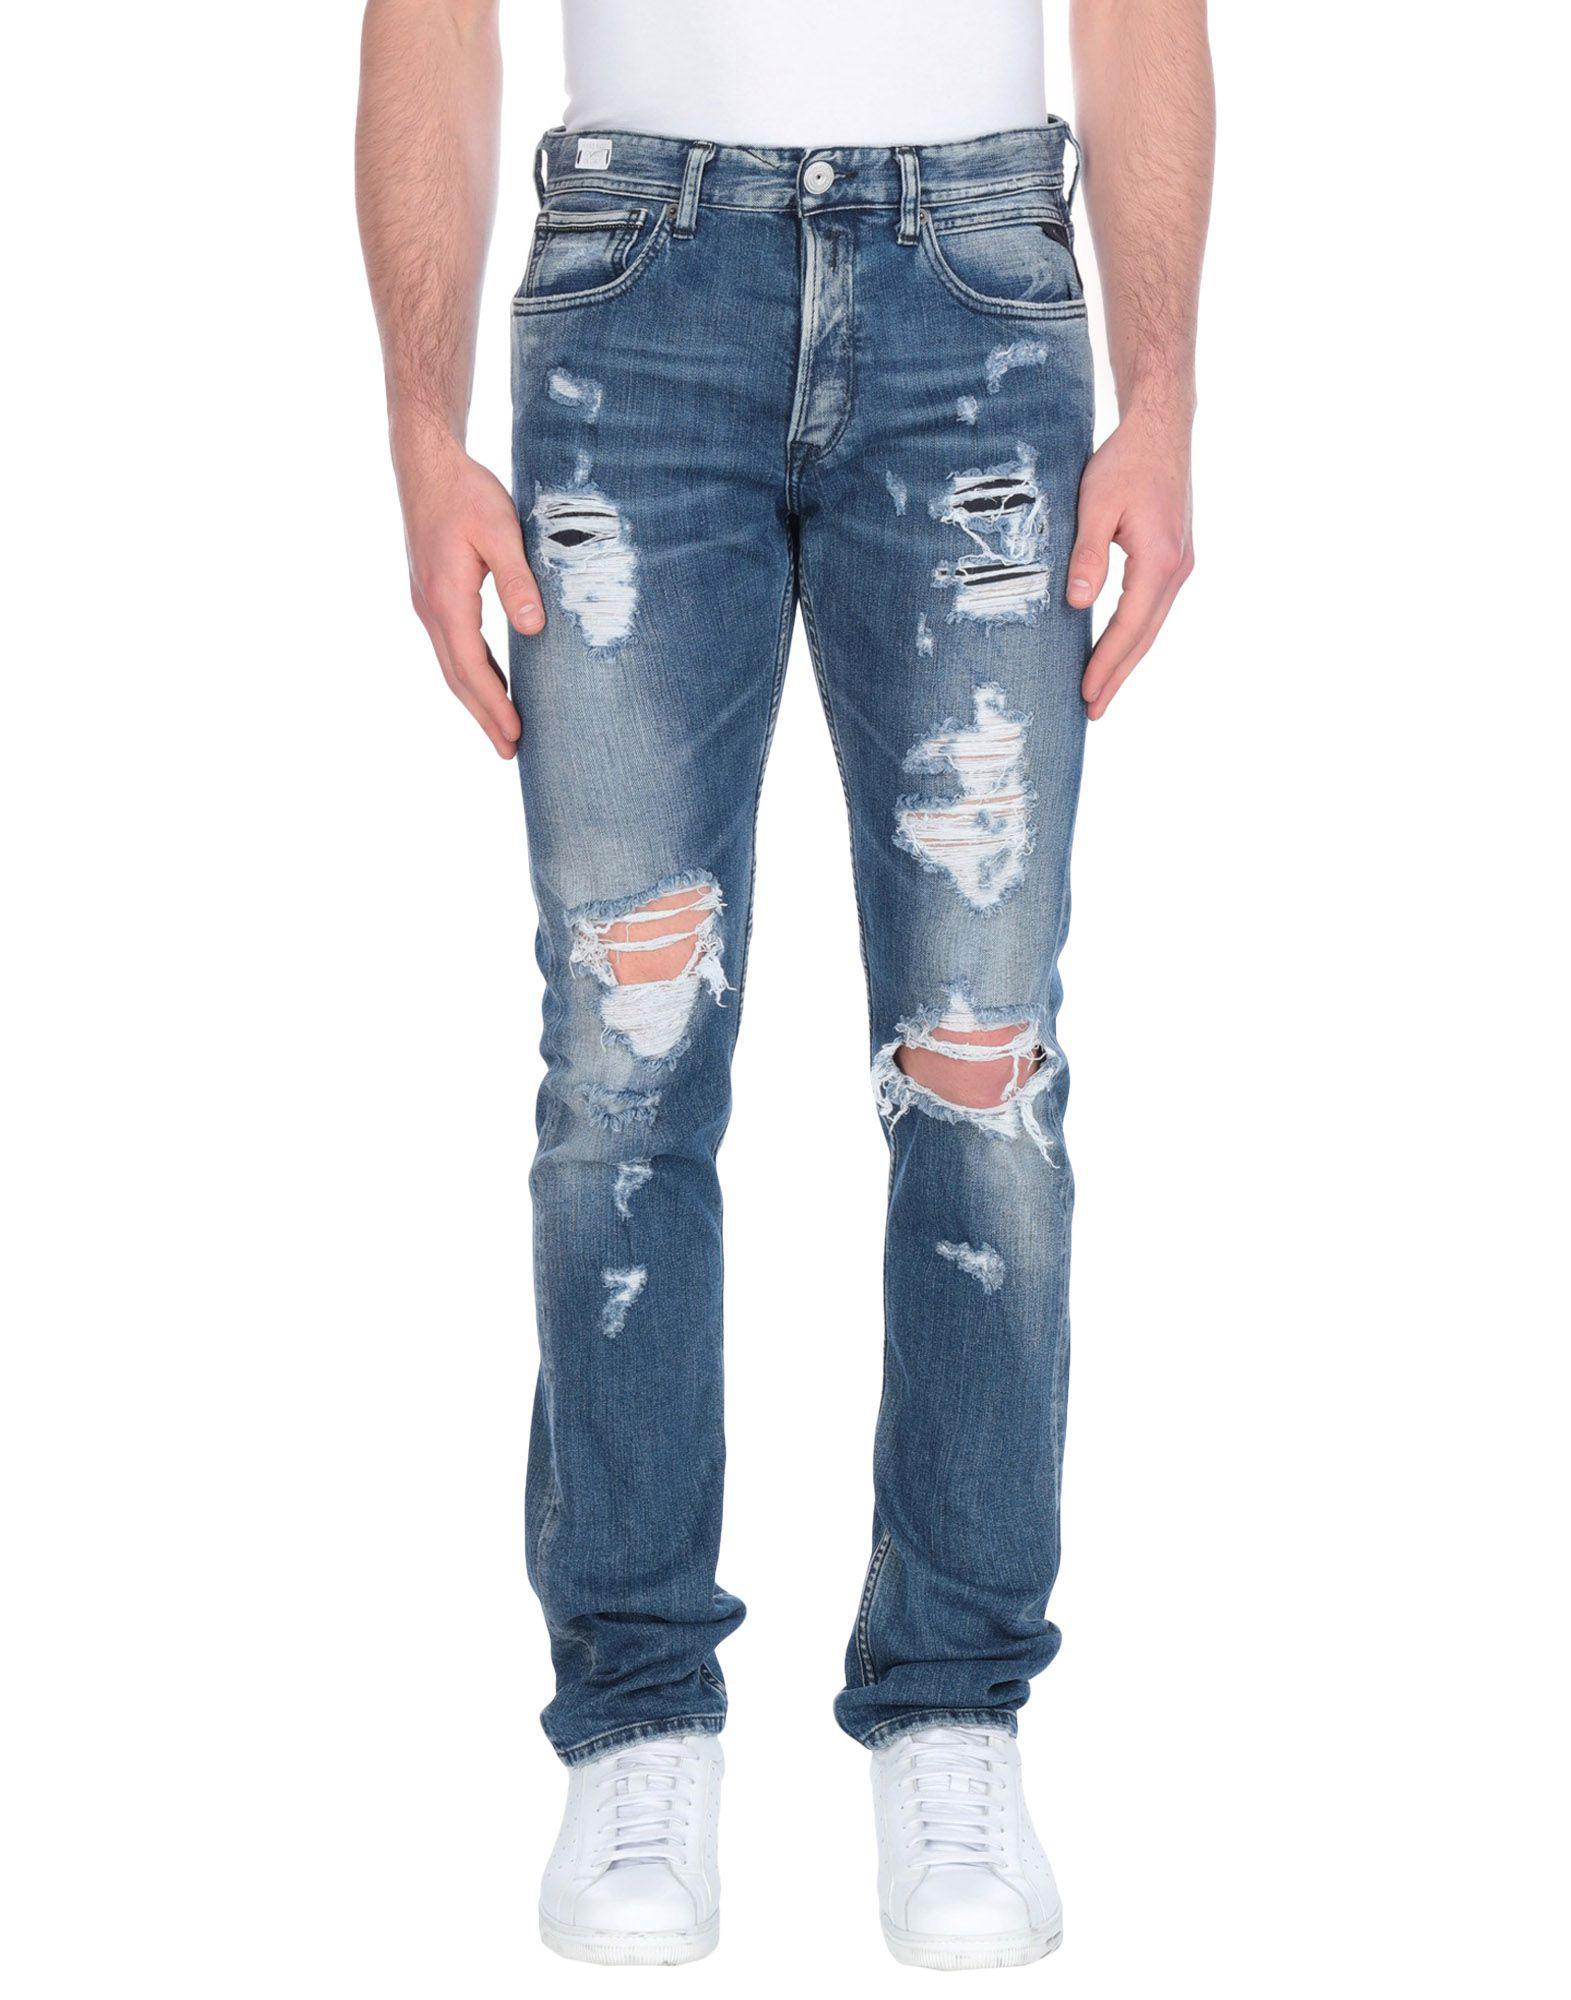 Replay Denim Trousers in Blue for Men - Lyst